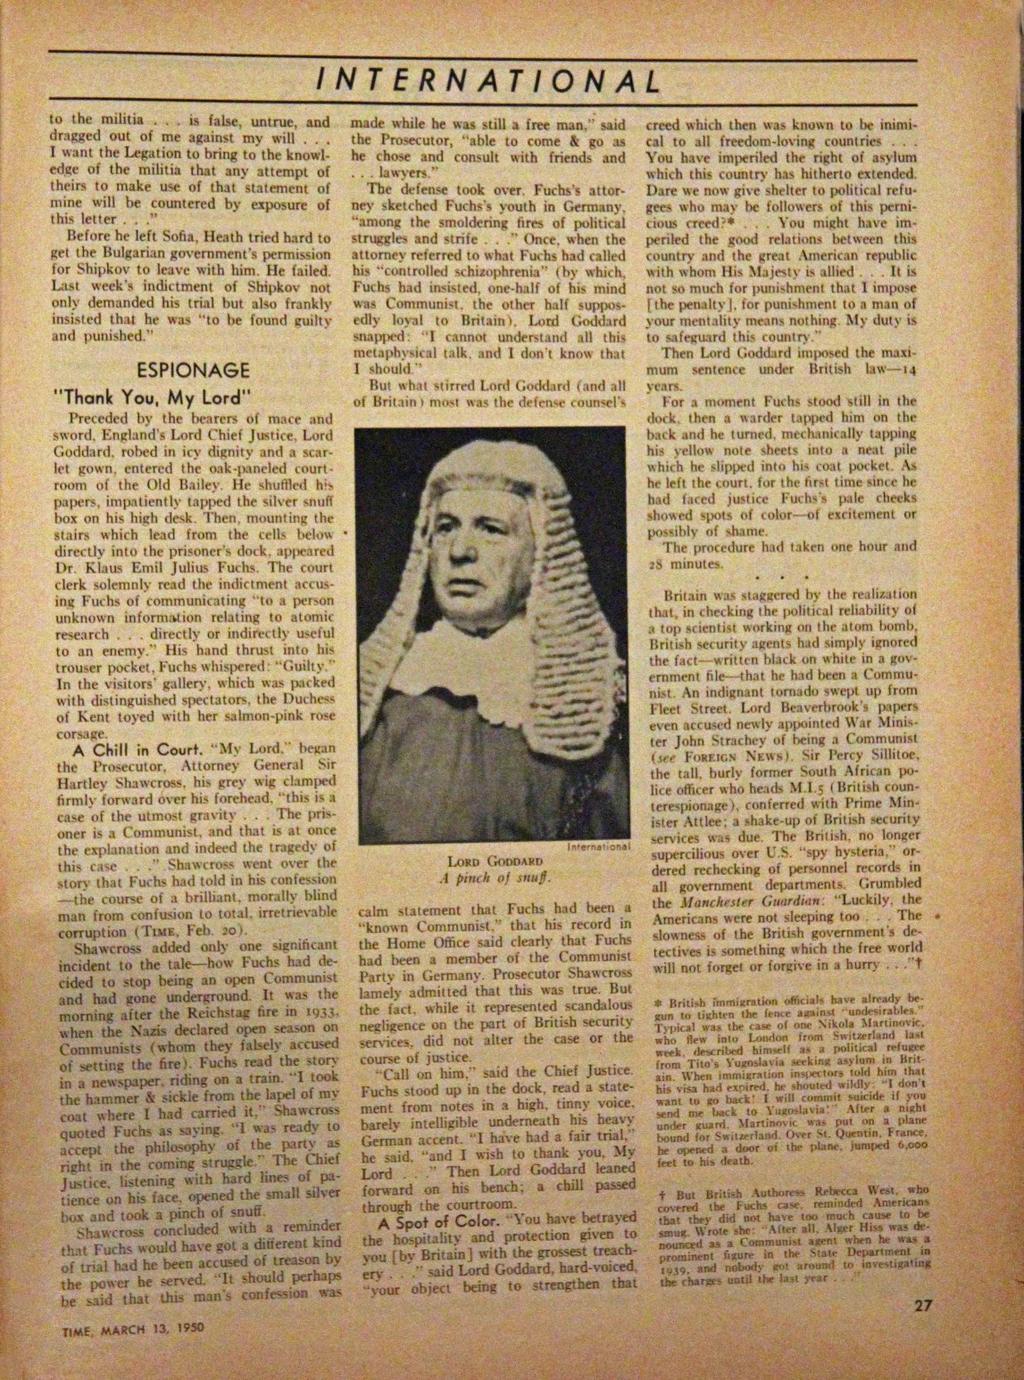 Page 27 of the March 13, 1950, TIME magazine